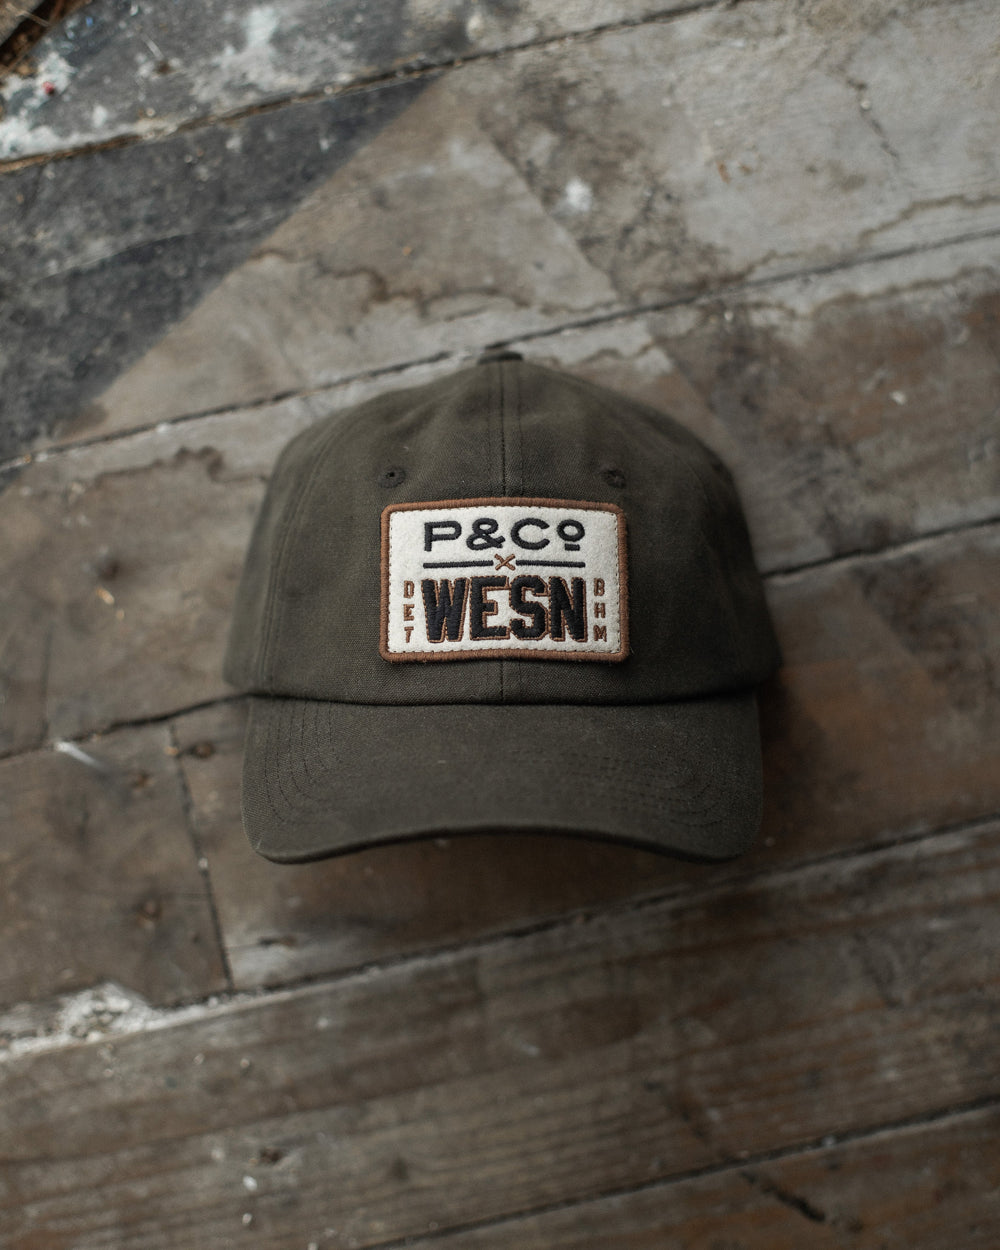 P&Co x WESN Waxed Cap - Olive